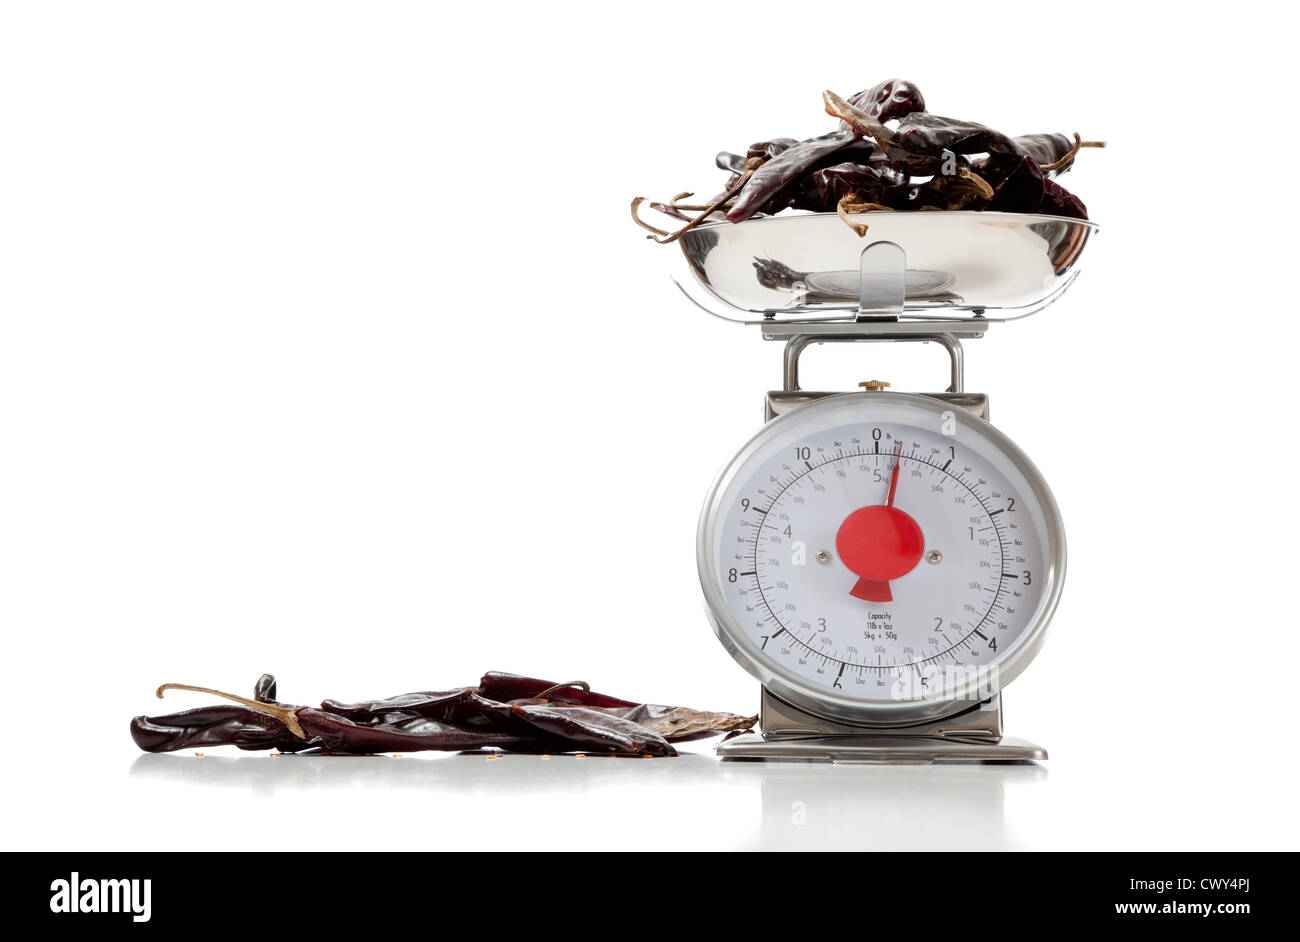 Fresh Meat On Digital Scale Isolated On White Stock Illustration - Download  Image Now - Weight Scale, Scale, Electronics Industry - iStock